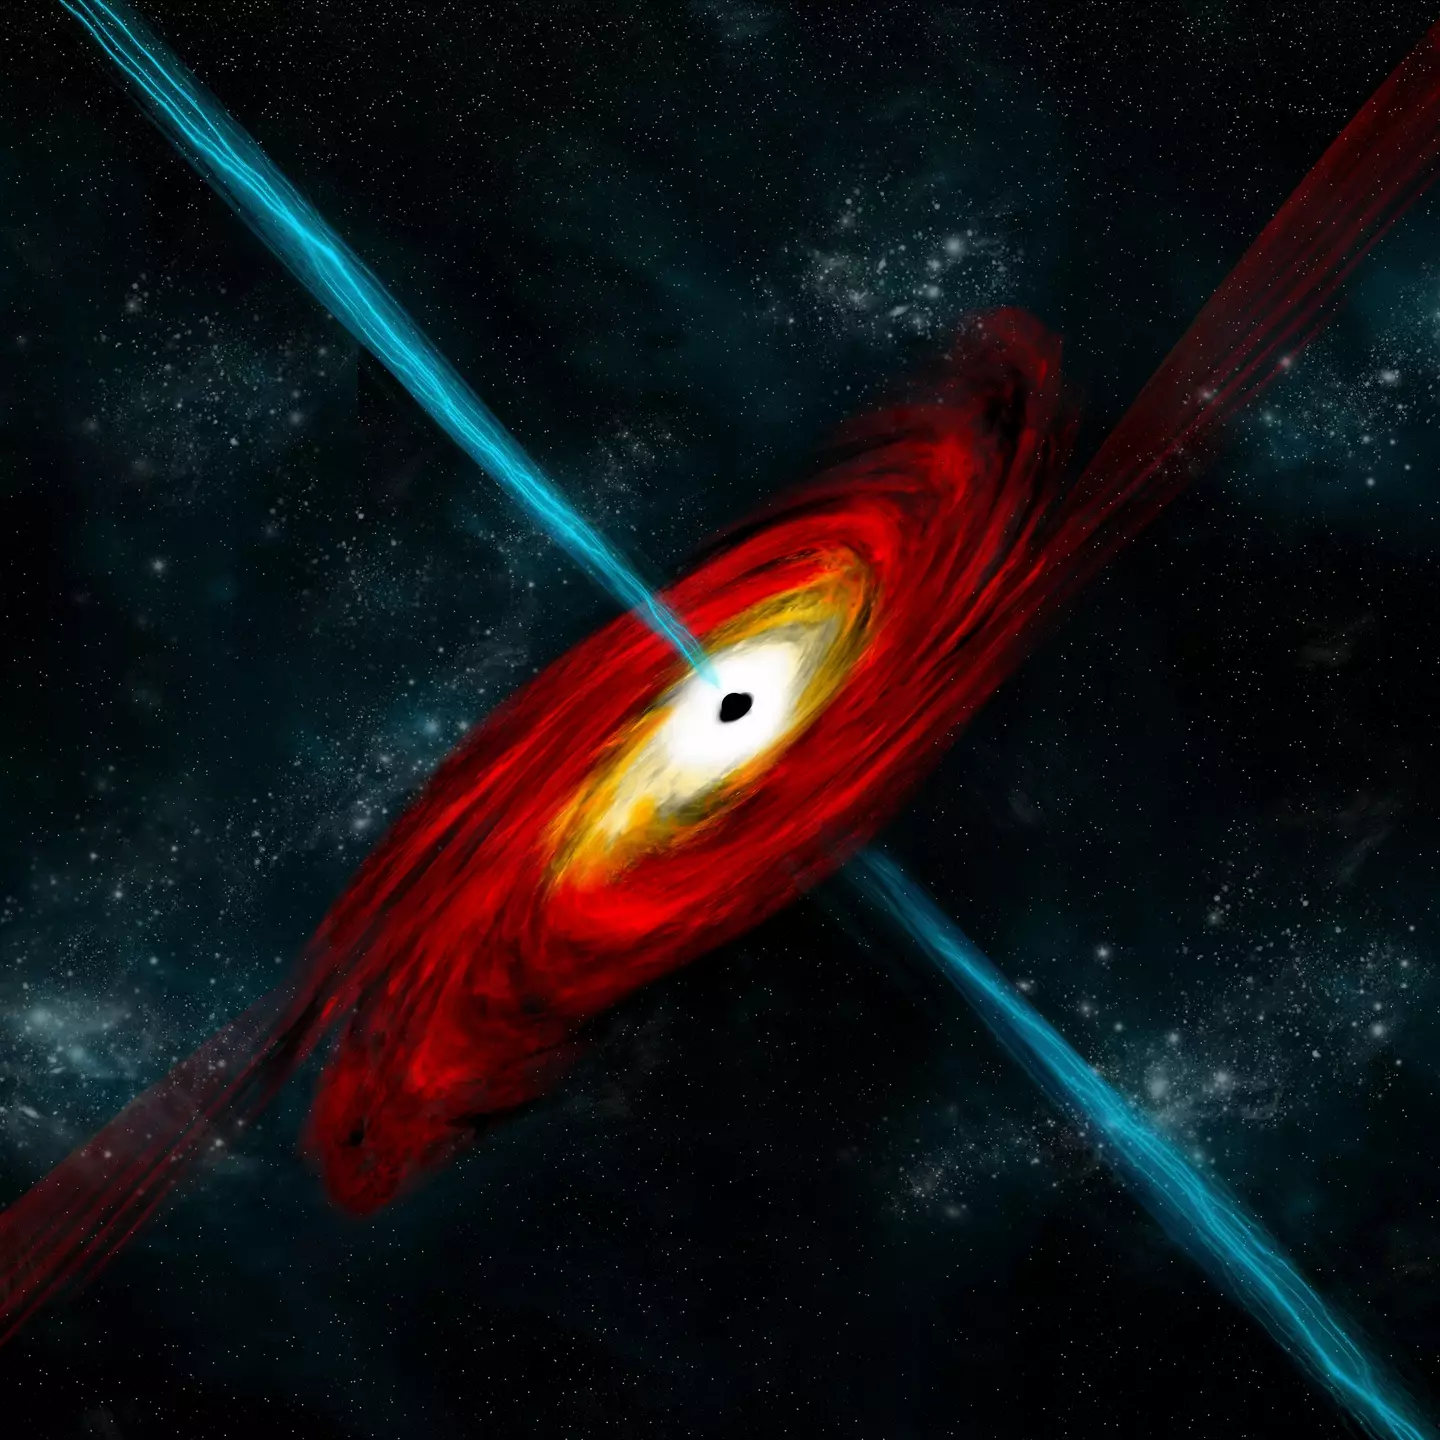 Scientist believe the blast was caused by a star collapsing into a black hole.